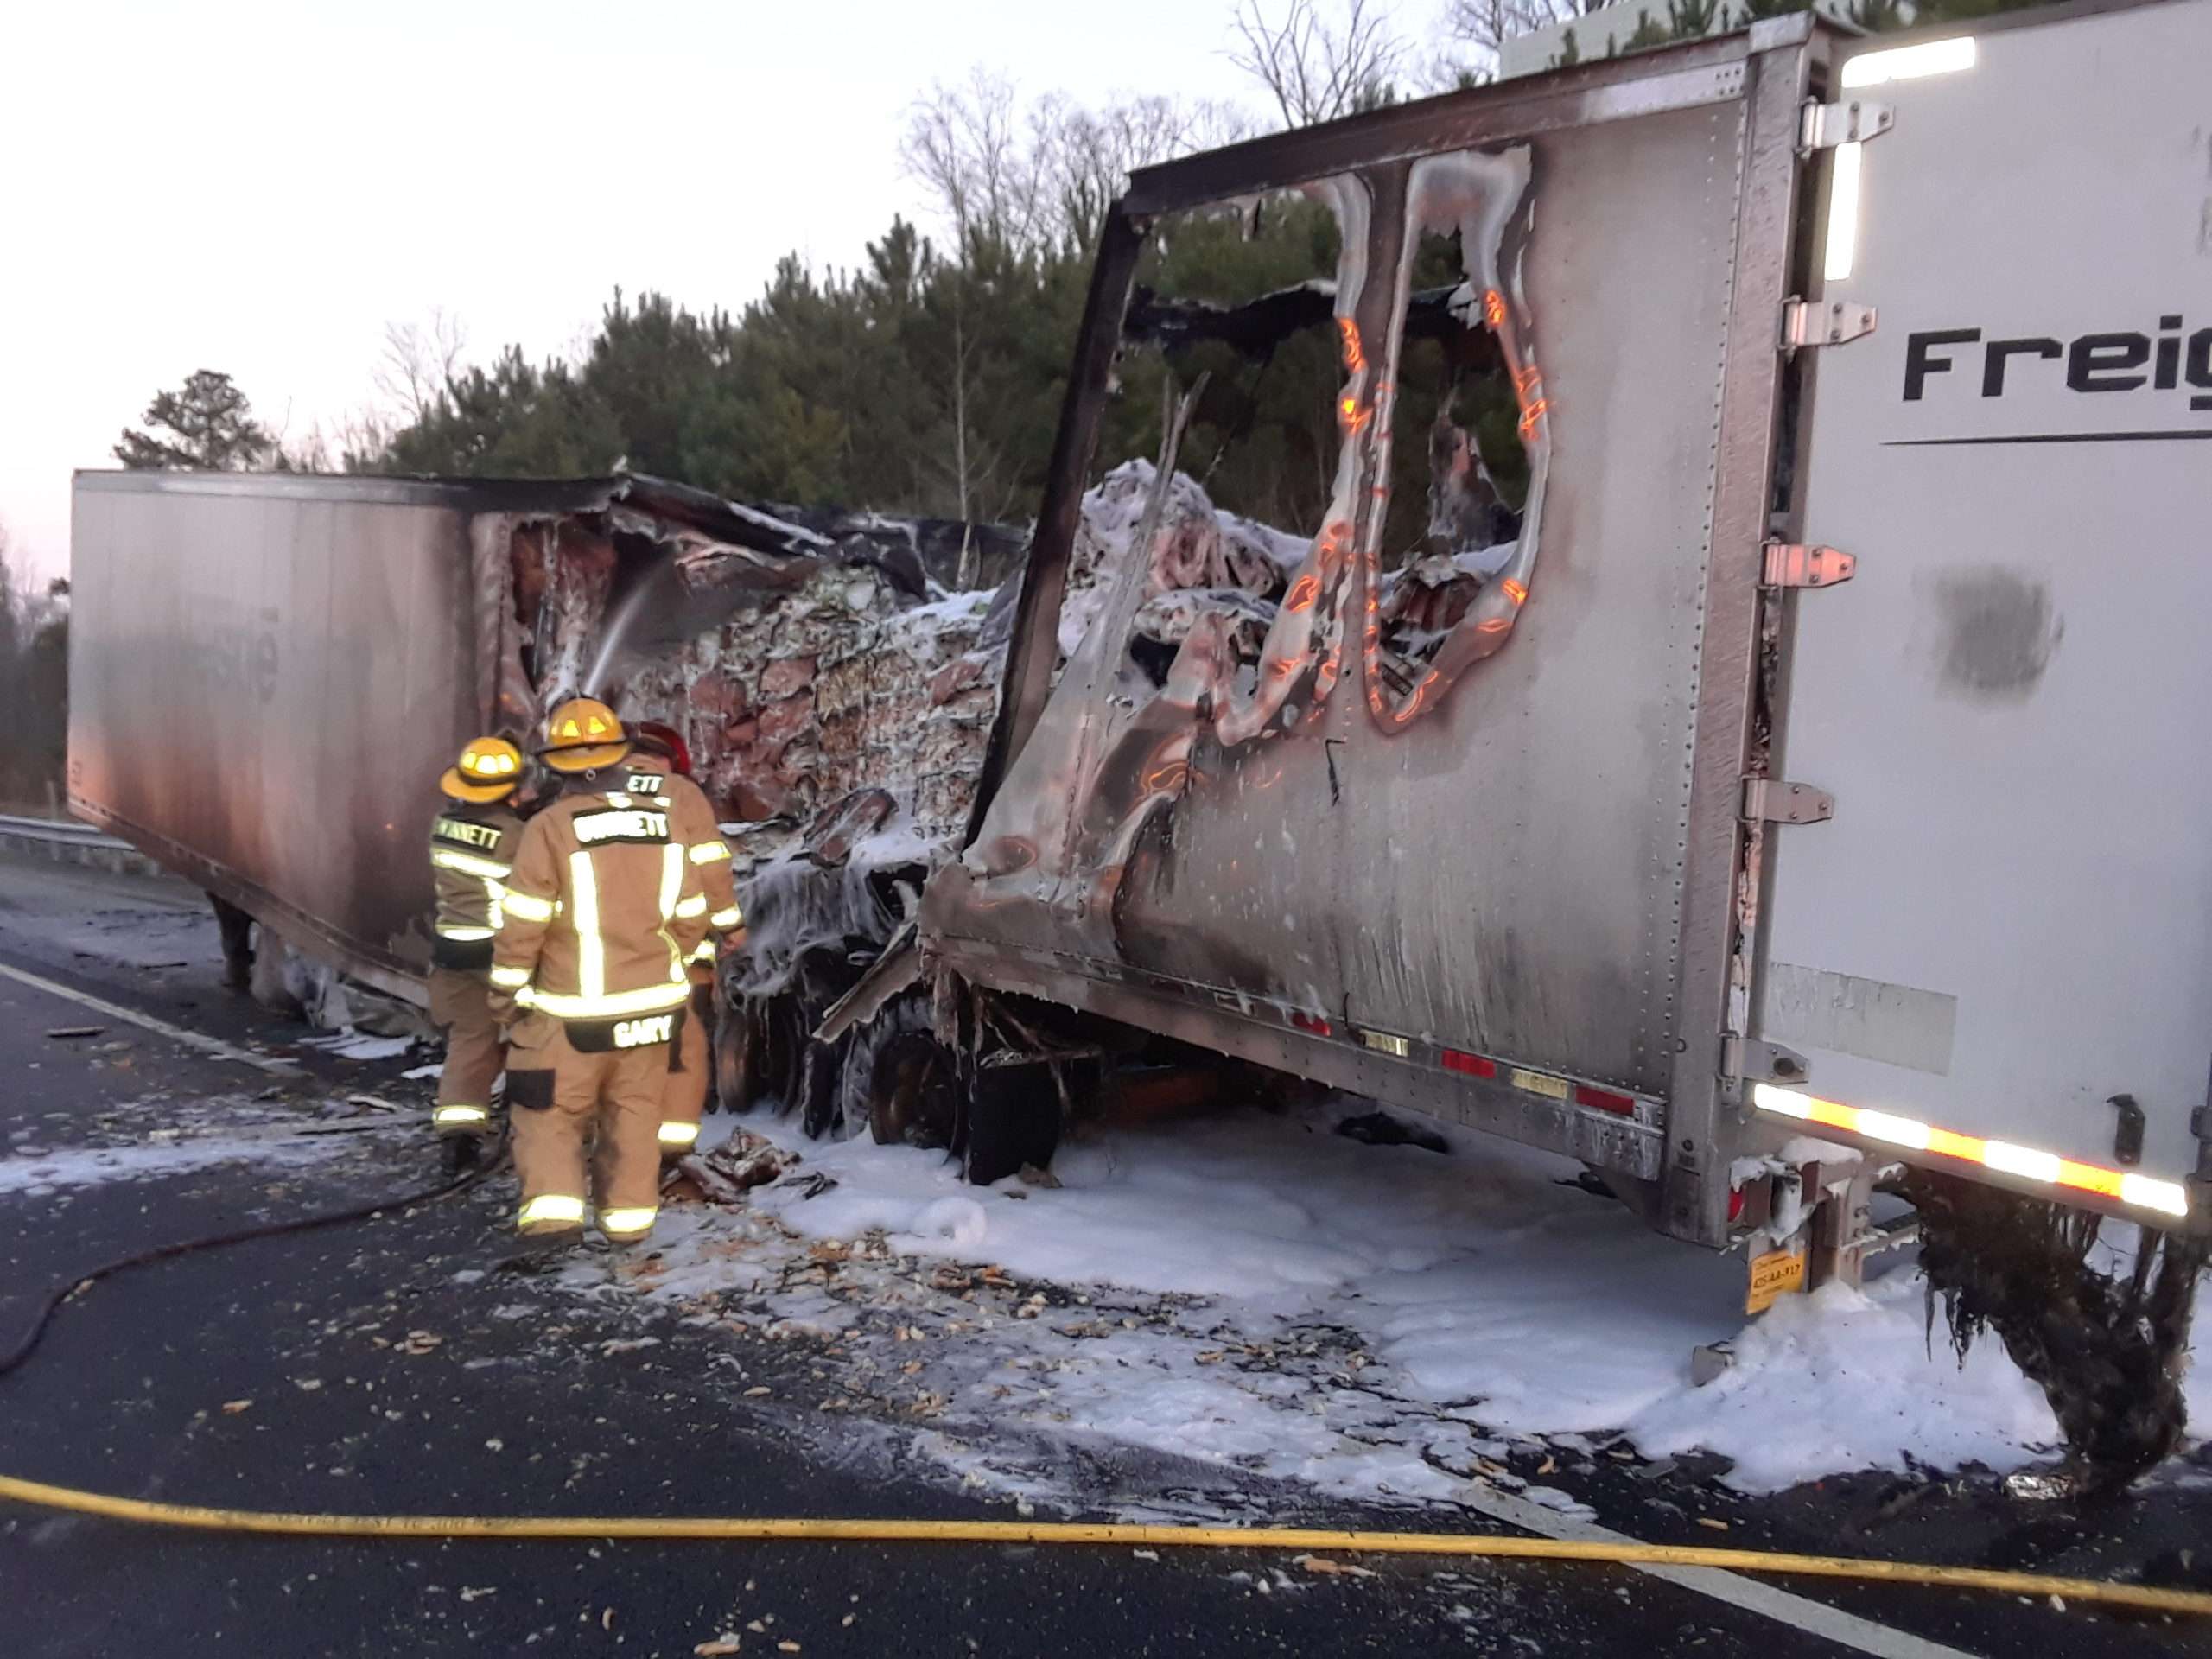 Tractor-trailer fire on I-85